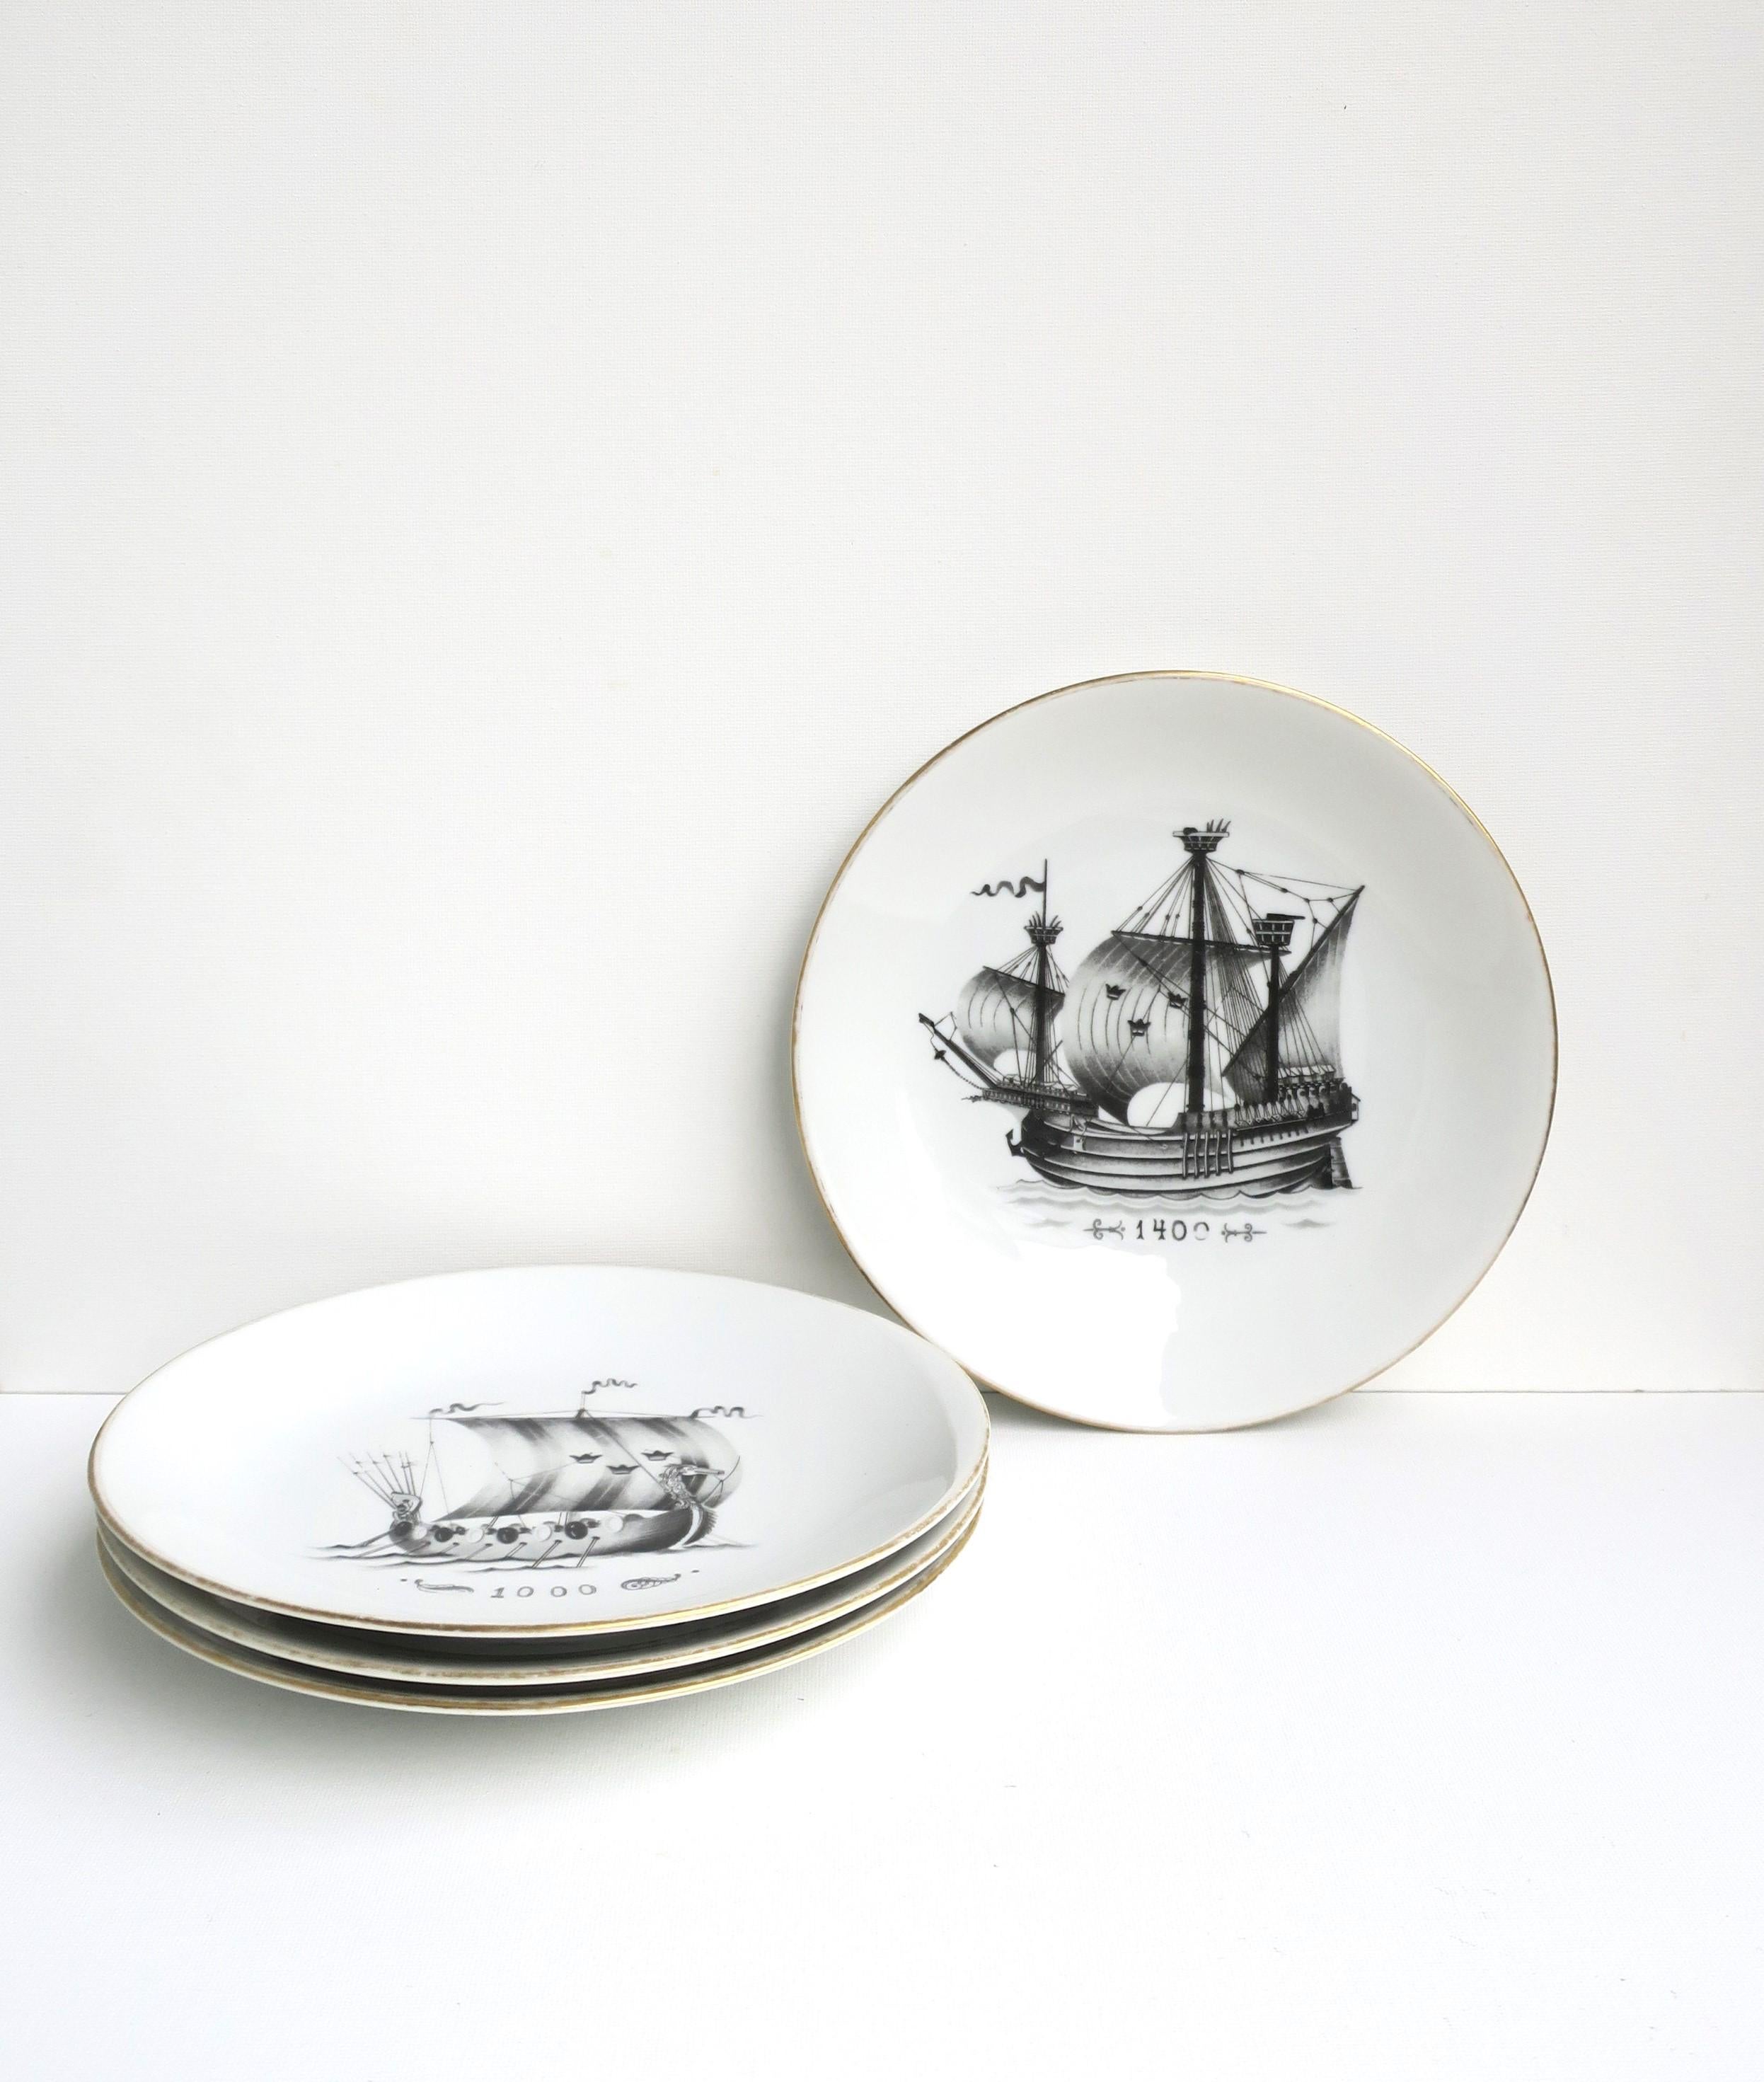 A beautiful set of four (4) Swedish nautical porcelain plates by Rörstrand, circa 20th century, Sweden. Plates are nautical themed with antique sailing ships in black and charcoal hues on a white porcelain ground, with the rim of plates edged in